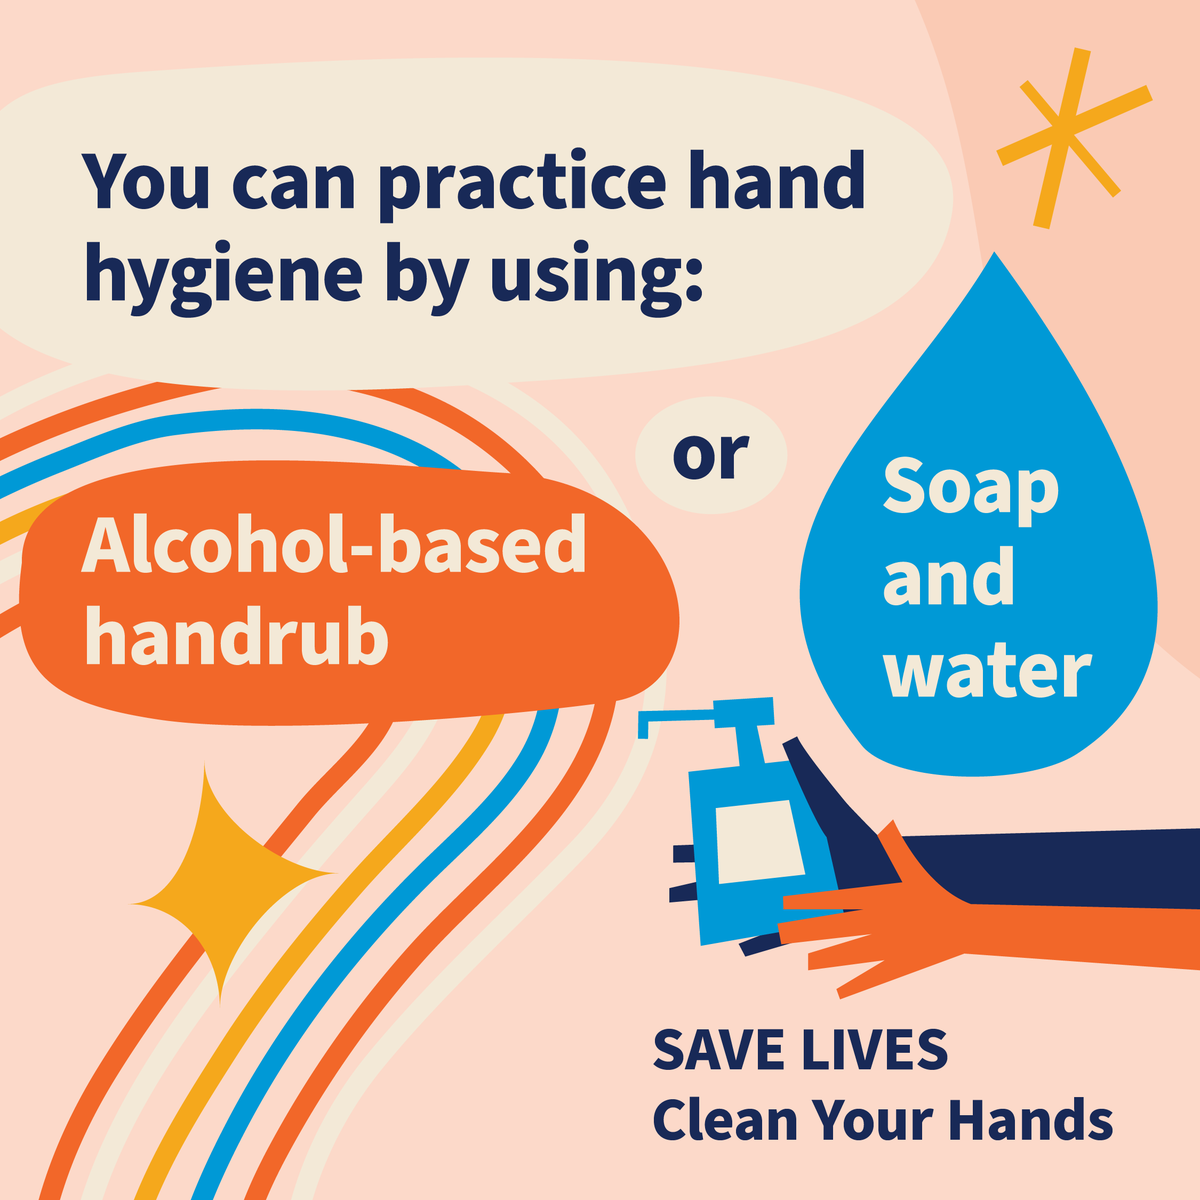 Today is “SAVE LIVES clean your hands” World Health Organizations World Hand Hygiene day 2024. The campaign aims to promote the importance of hand hygiene in health care and to bring people together in support of hand hygiene improvement globally.  #HandHygieneDay #CleanHands